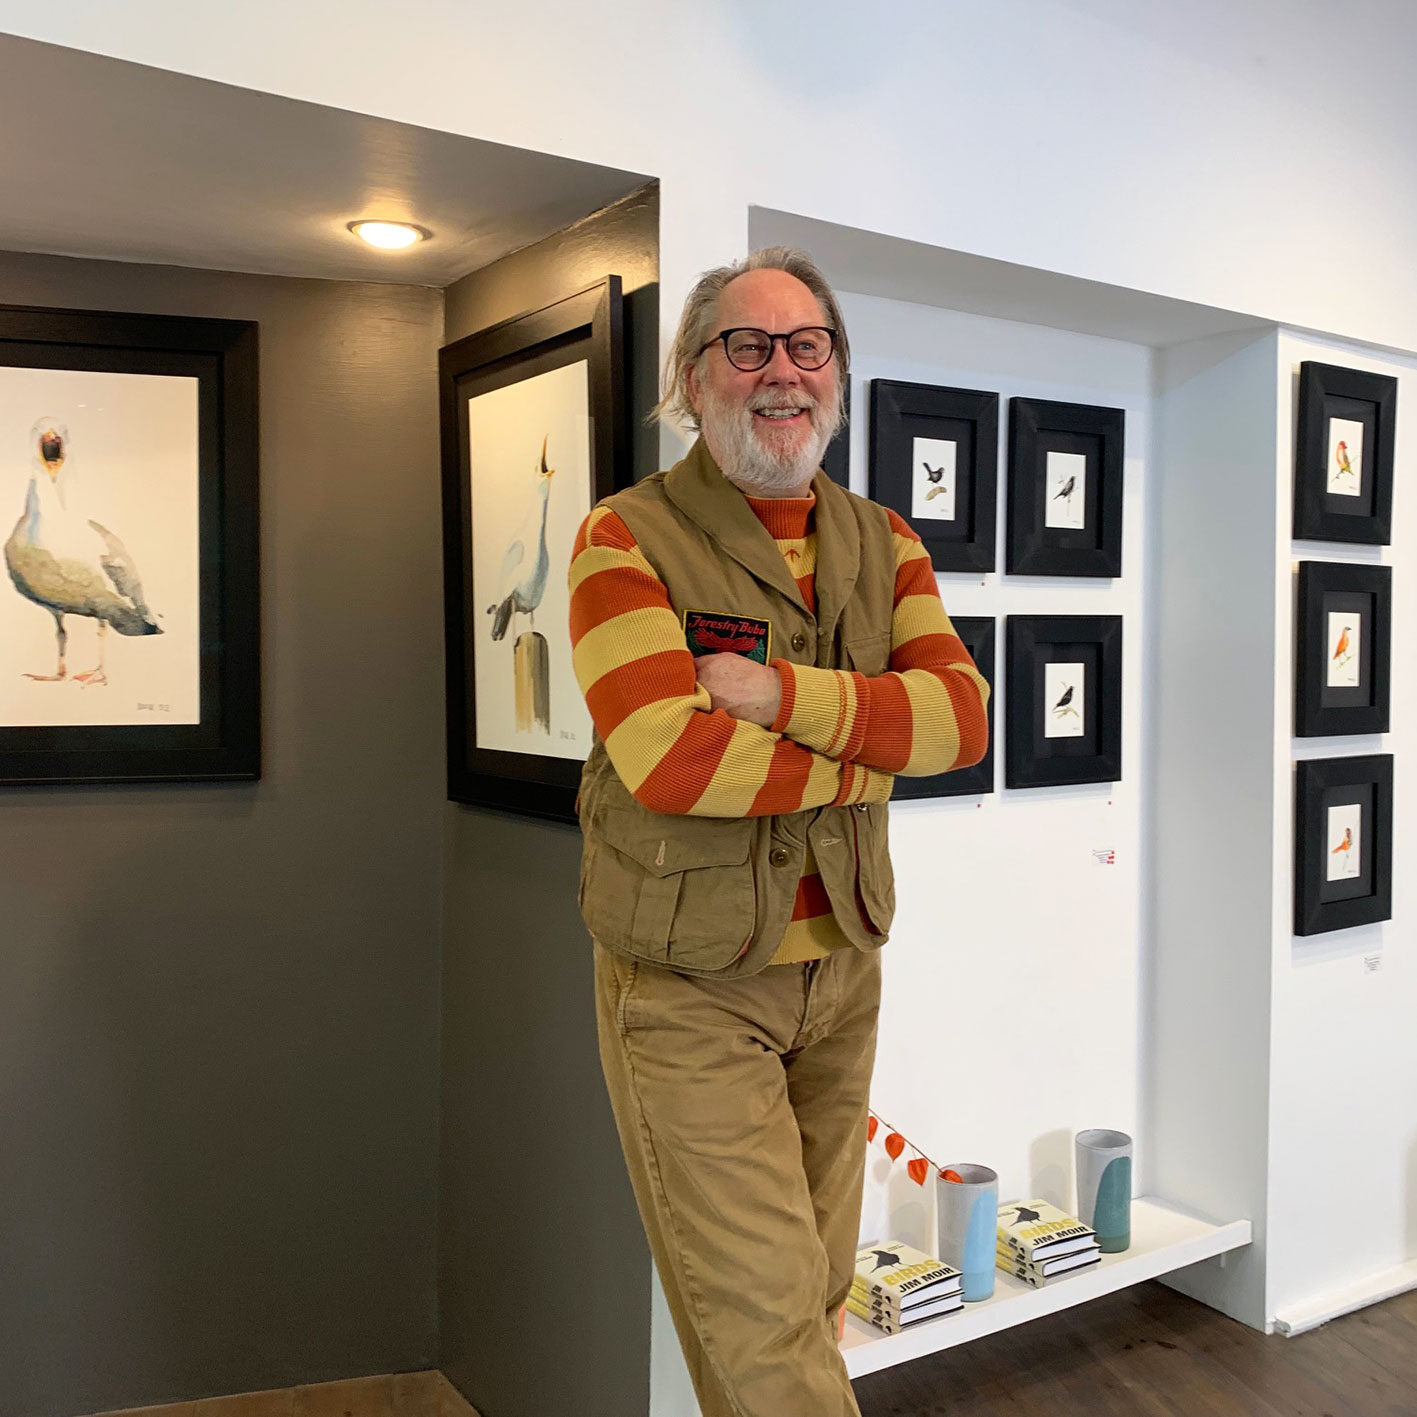 a photograph of the artist Jim Moir, otherwise known as the comedian Vic Reeves, with his paintings at Cornwall Contemporary gallery